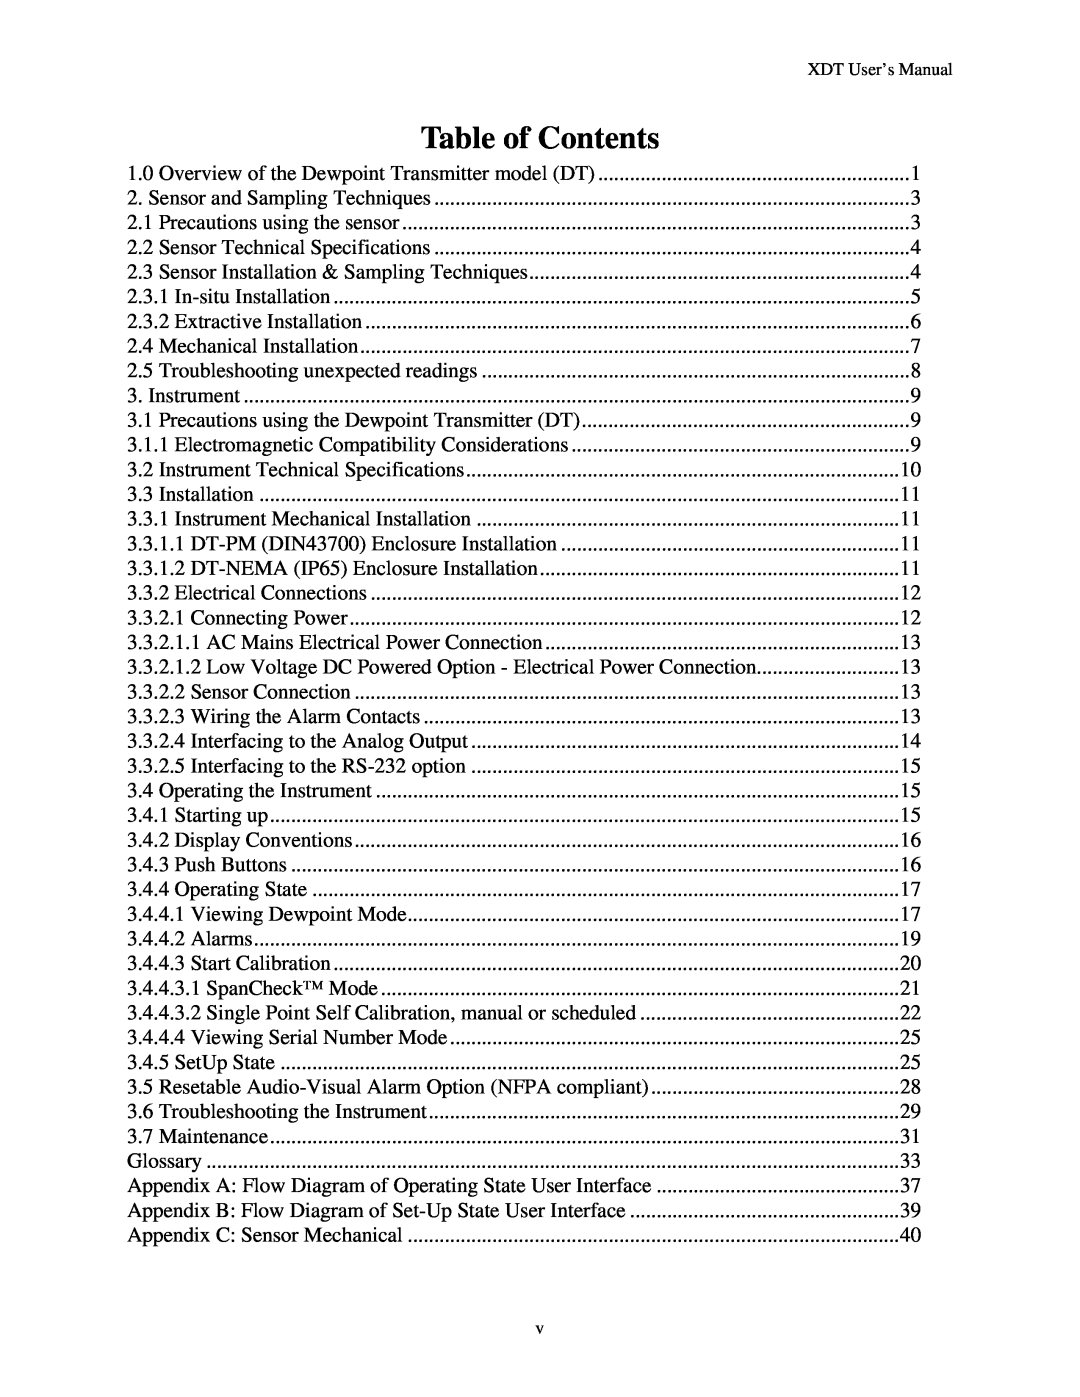 Epson XDT manual Table of Contents 